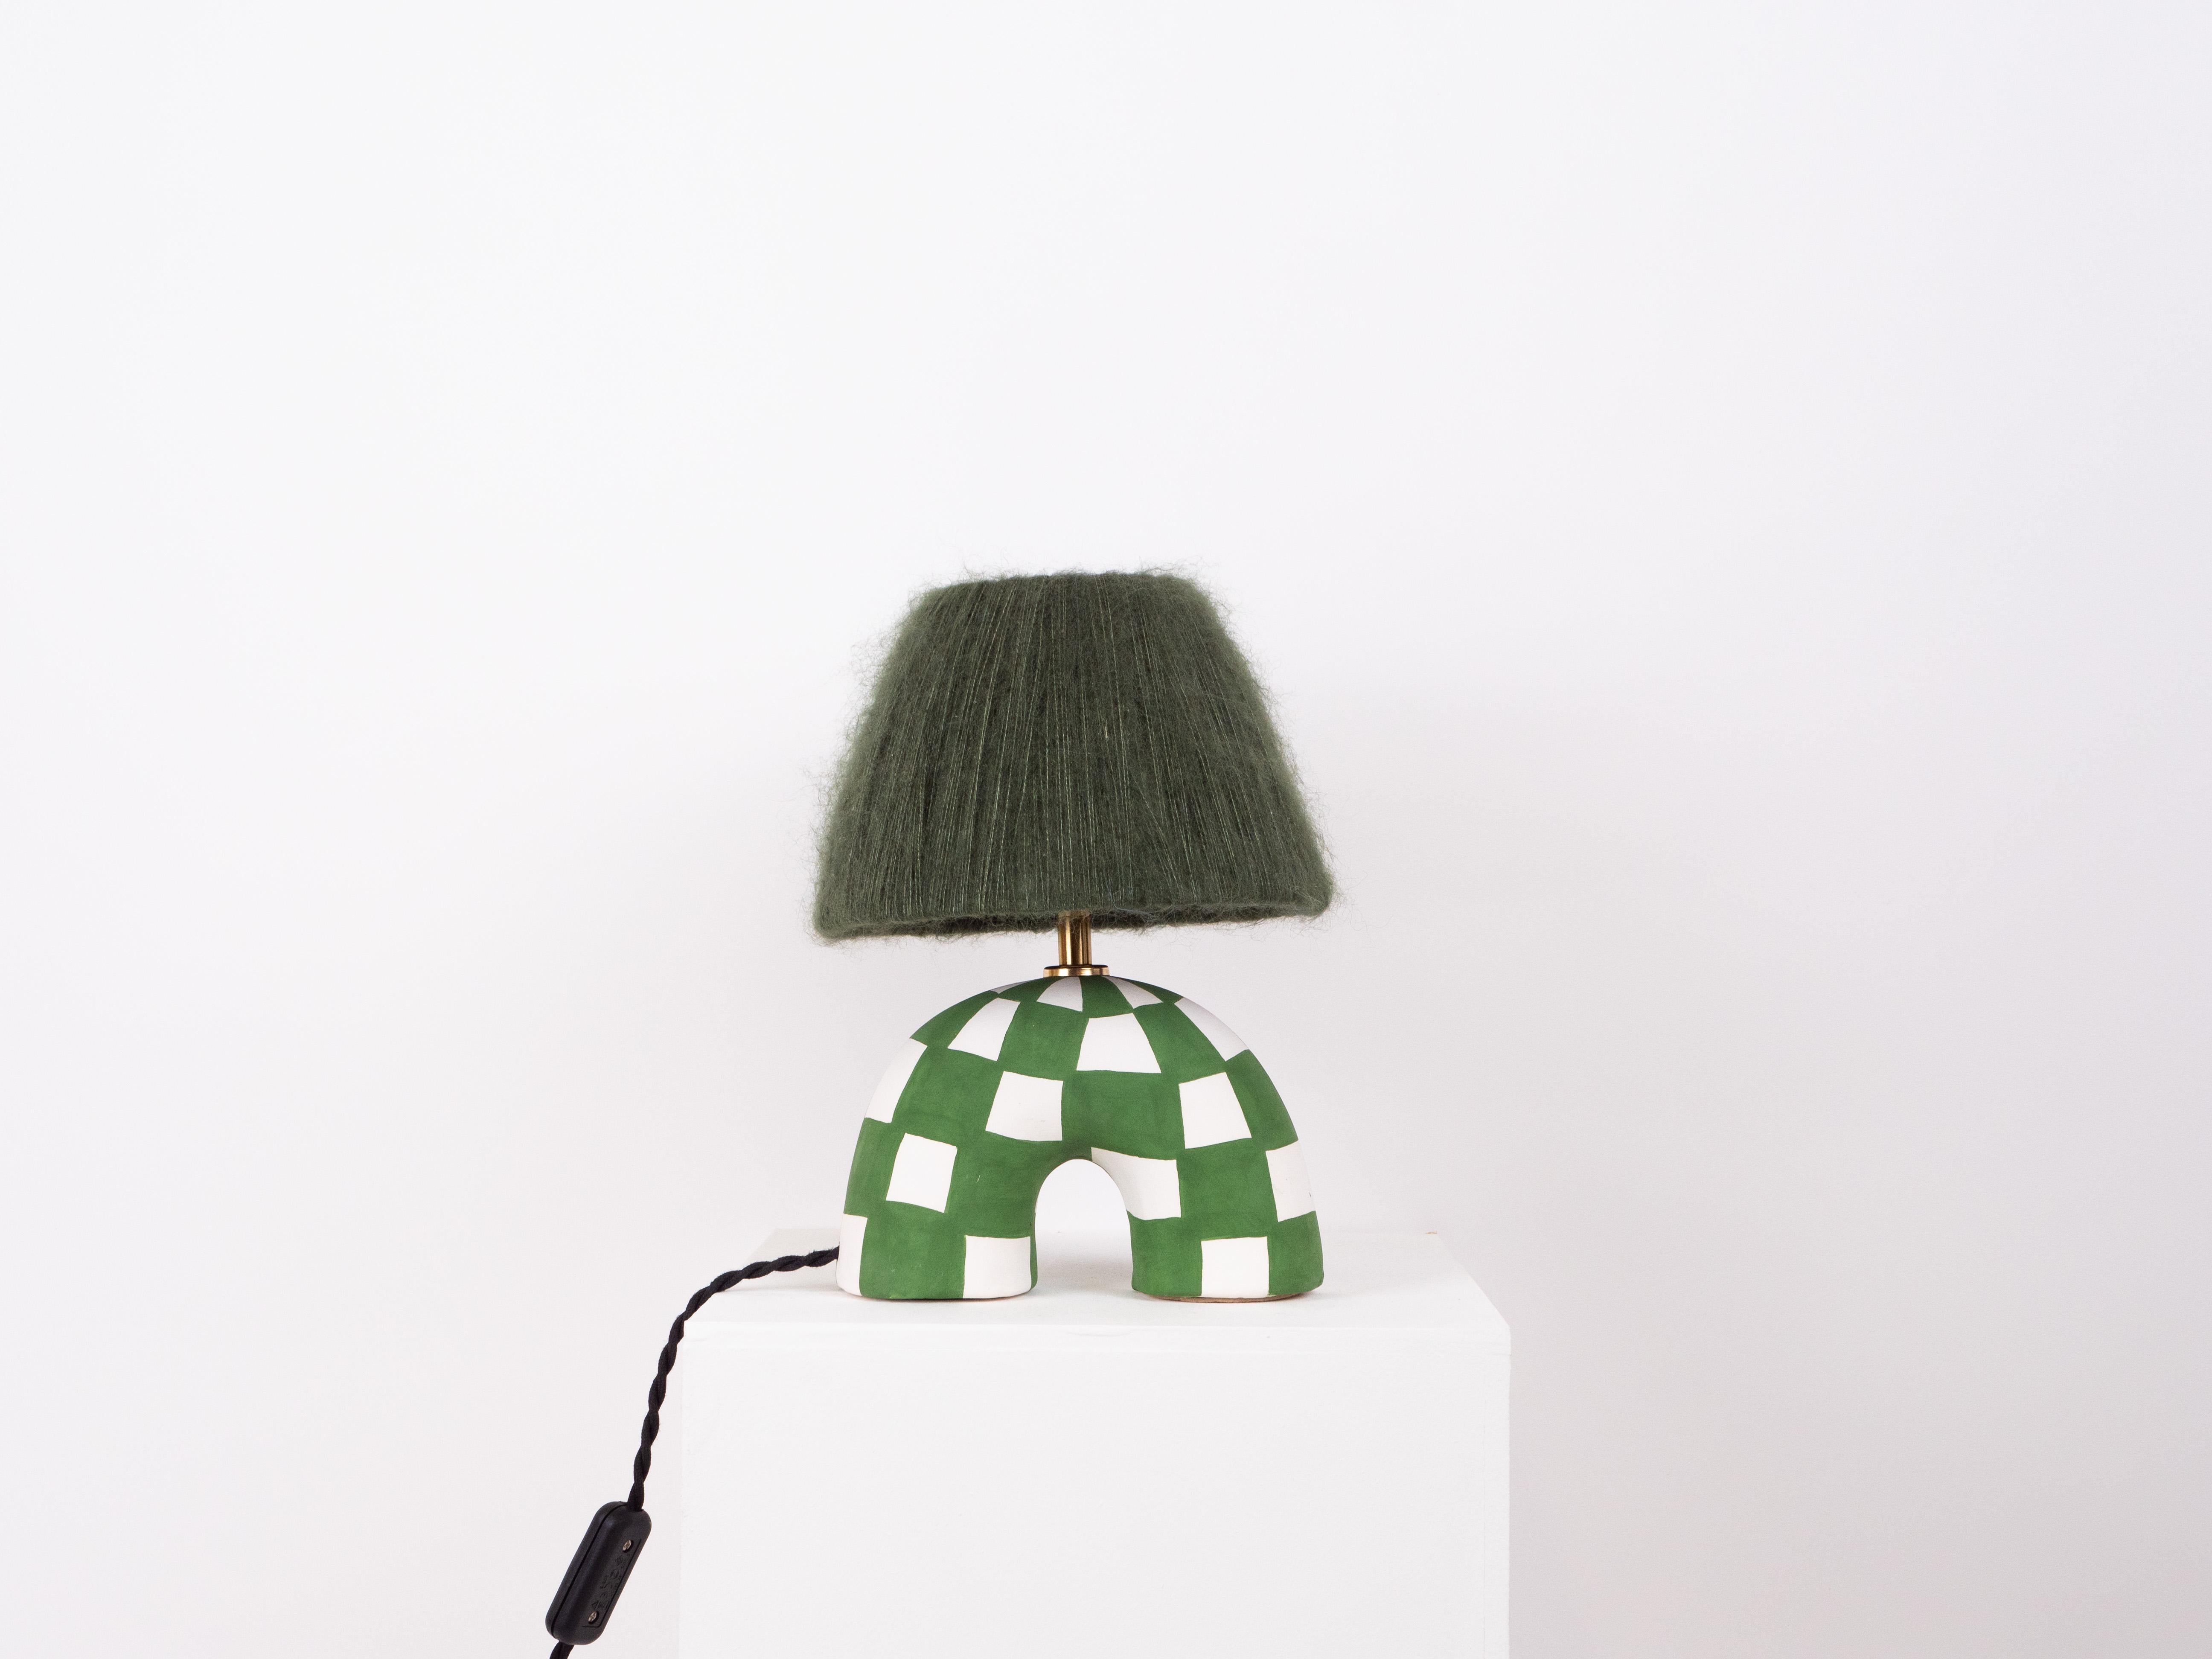 White and Green Cherckerboard pattern with a matte finish and green mohair shade 

Estimated processing time is 2 weeks from order confirmation

Pictured with a Mini Globe LED E27 Bulb. Bulb not included

To pair this base with a shade in an